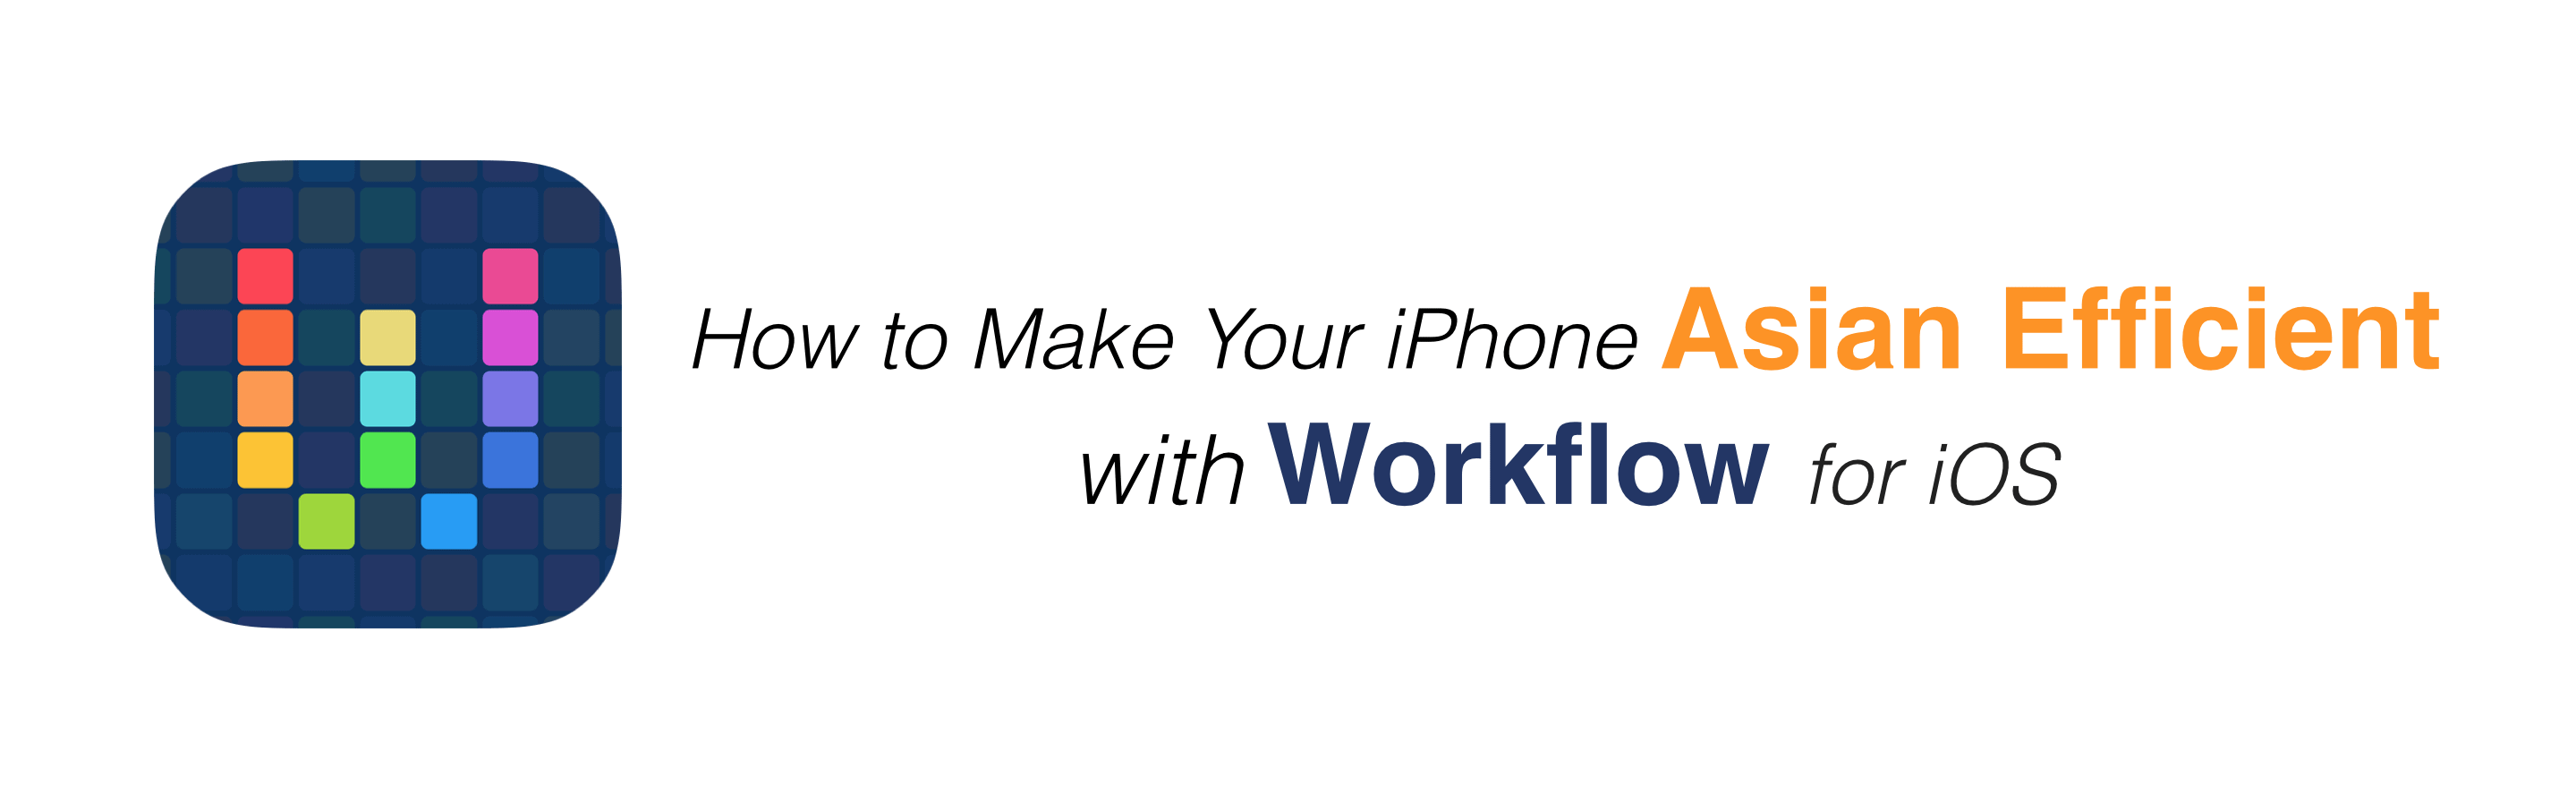 How to make your iPhone Asian Efficient with Workflow